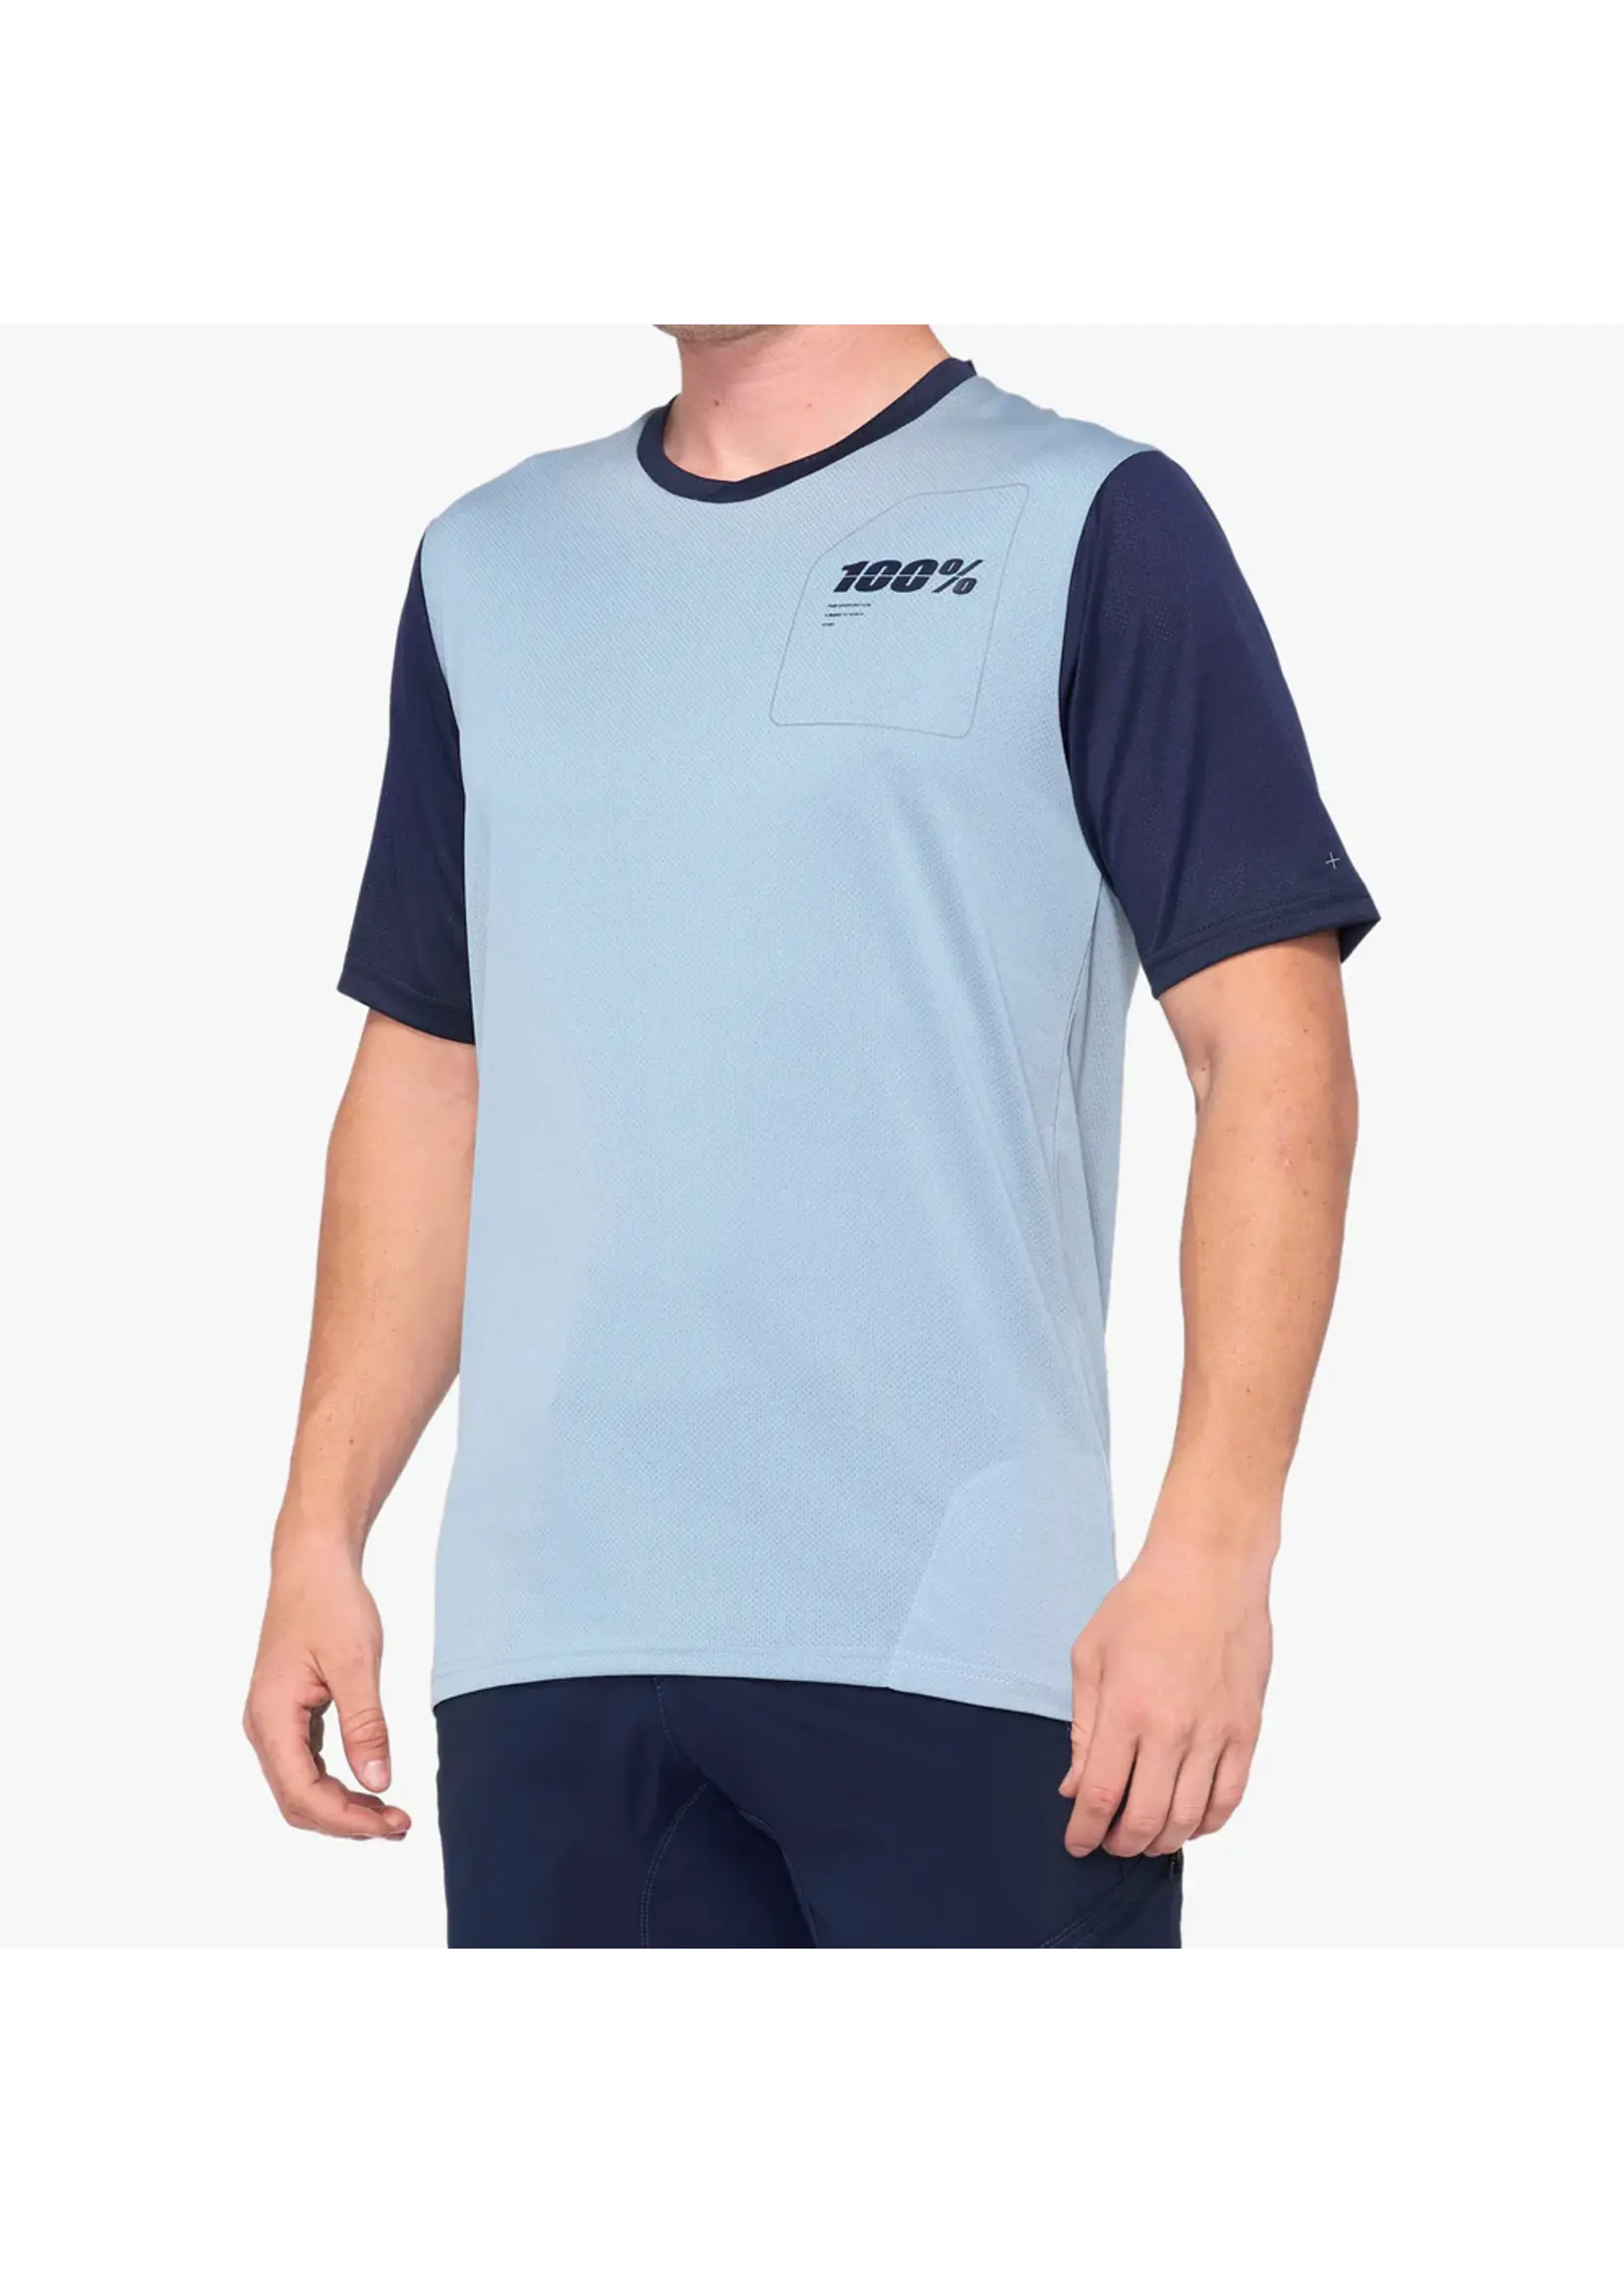 100 Percent 100% Ridecamp All Mountain Short Sleeve Jersey, Slate Blue